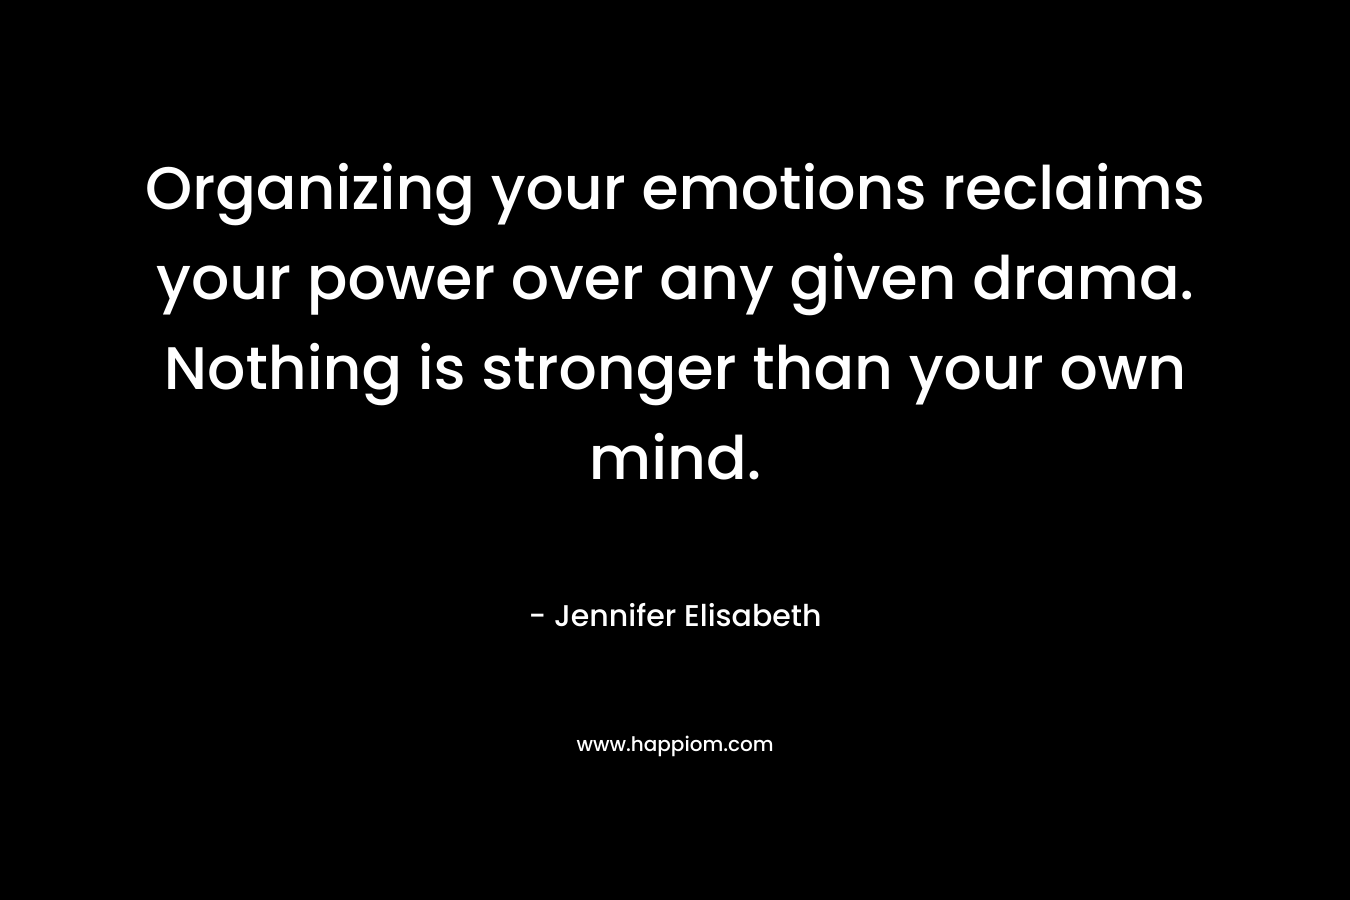 Organizing your emotions reclaims your power over any given drama. Nothing is stronger than your own mind. – Jennifer Elisabeth